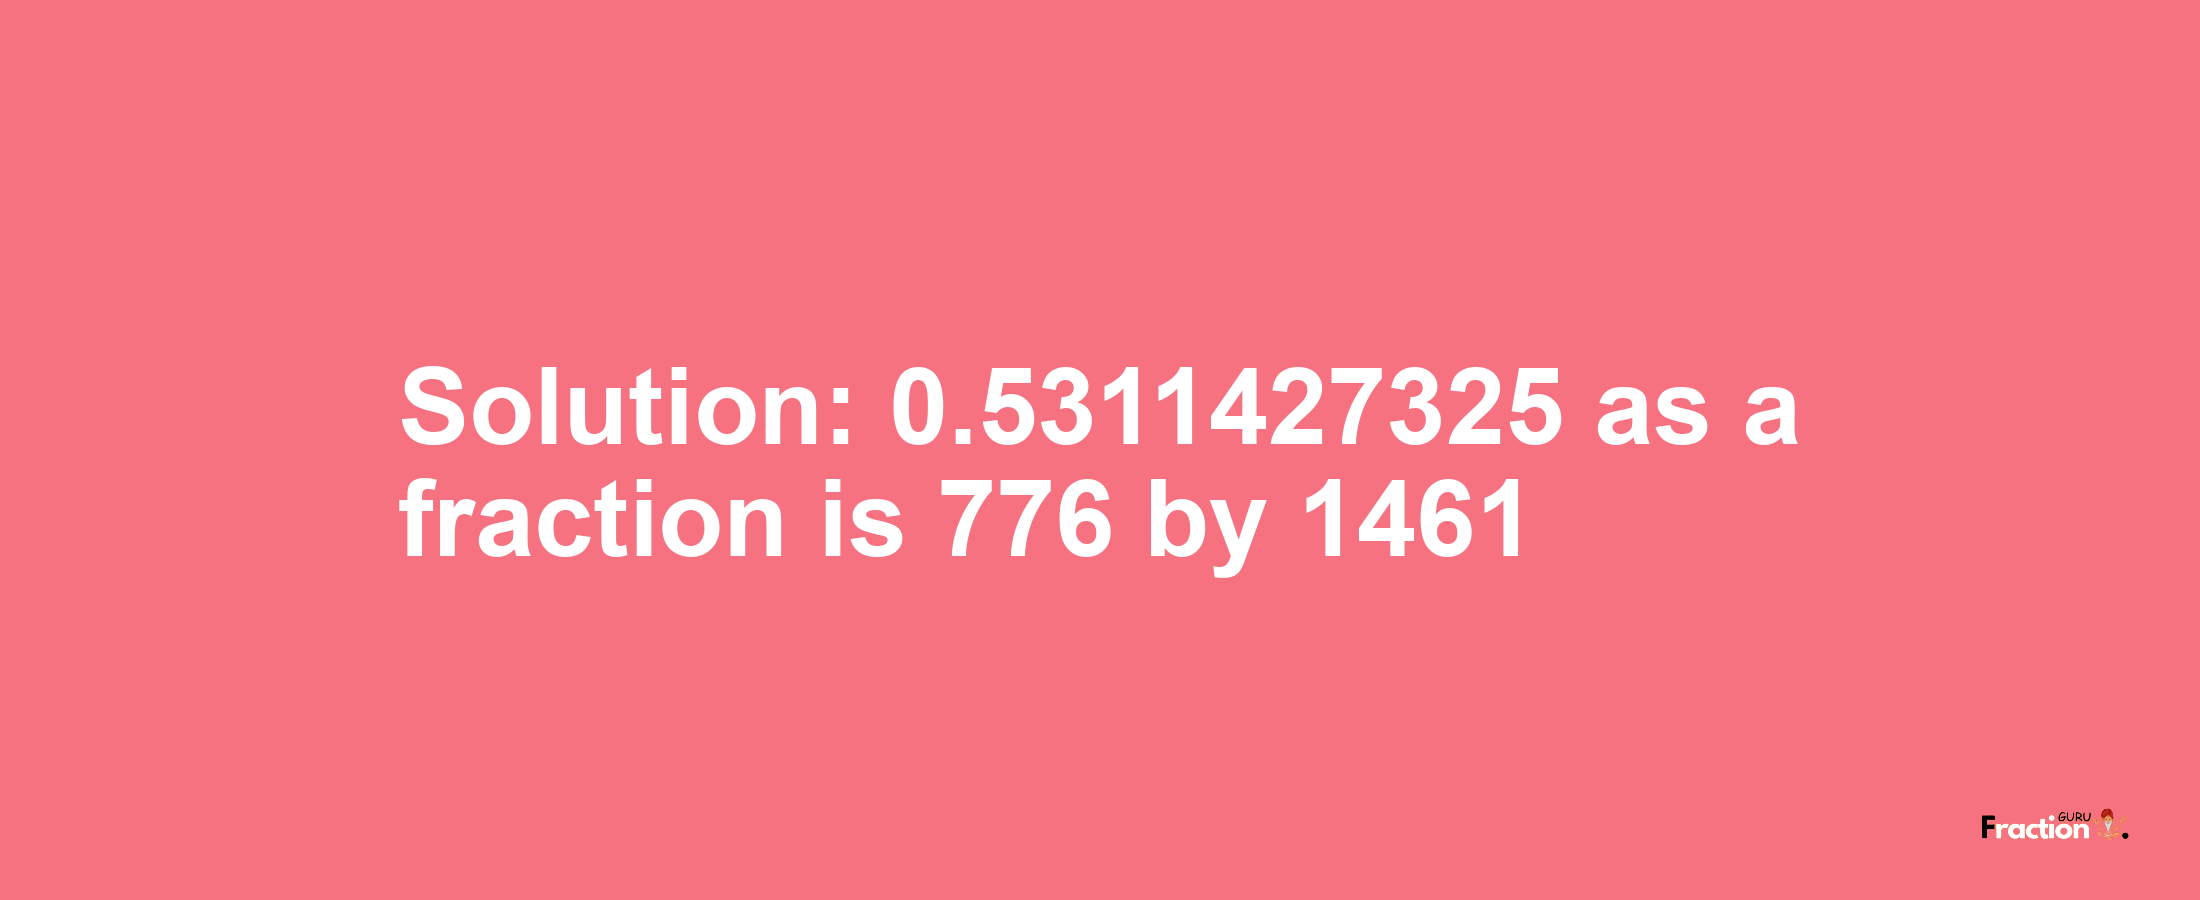 Solution:0.5311427325 as a fraction is 776/1461